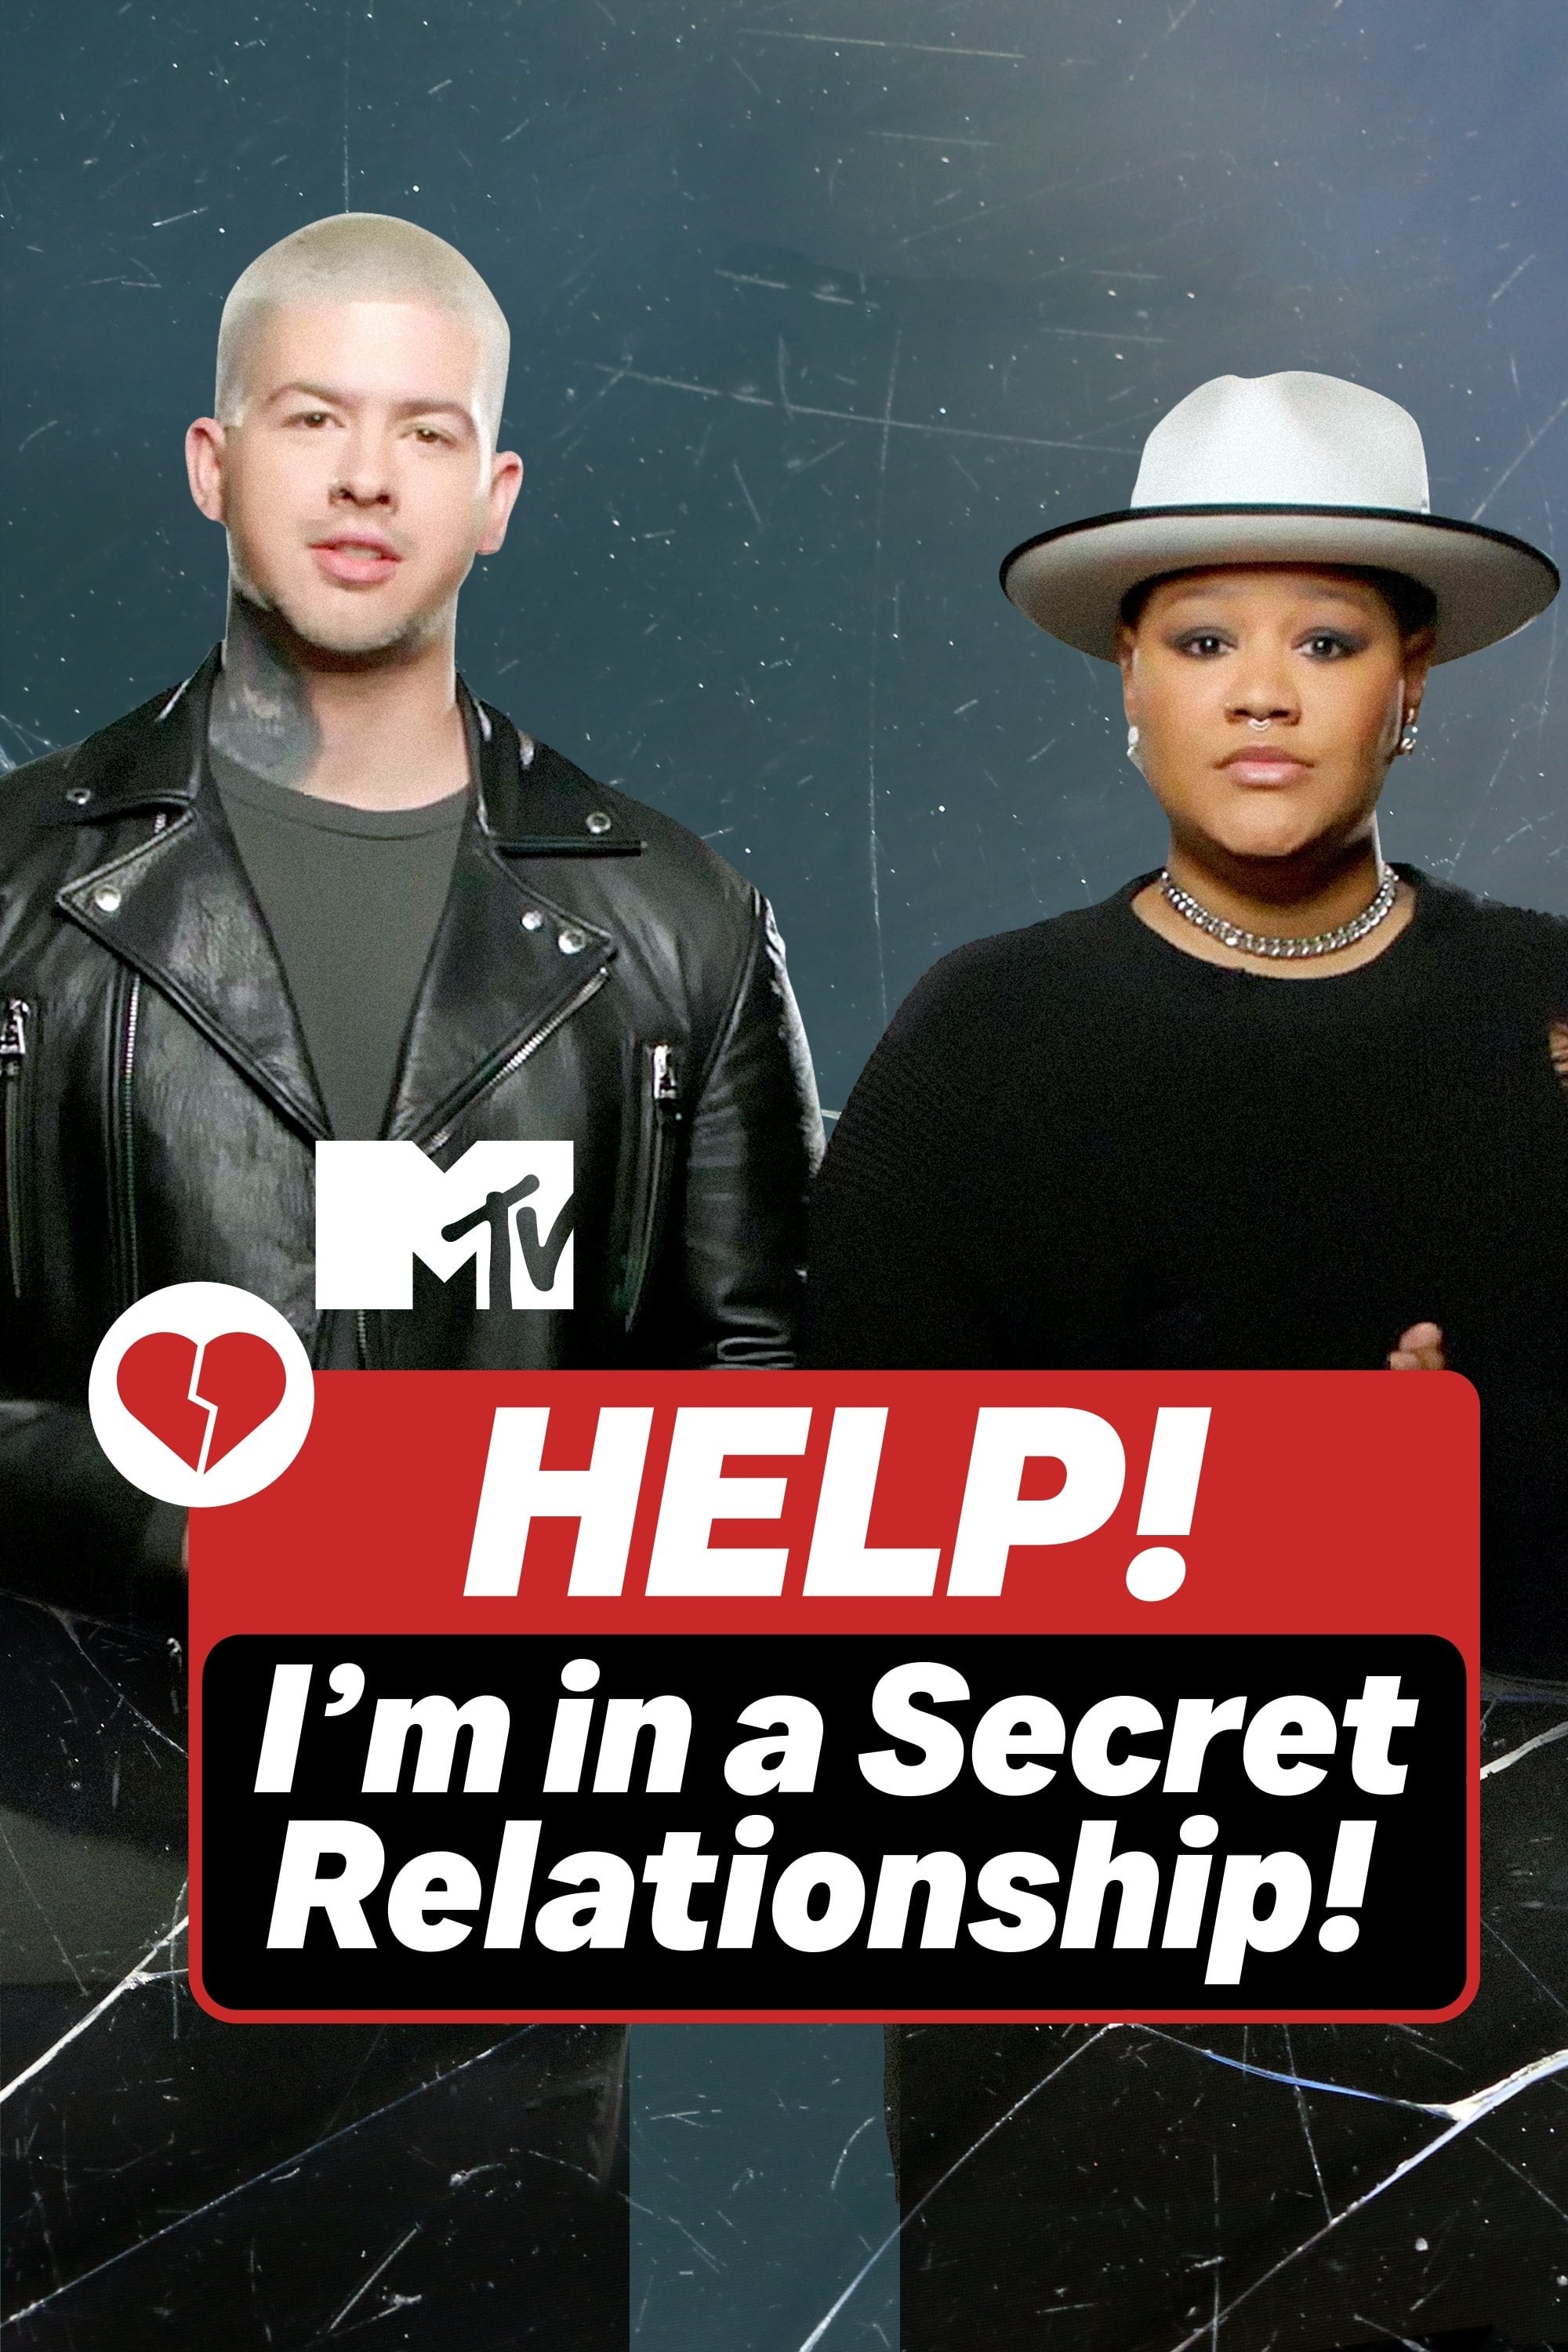 Help! I'm in a Secret Relationship! TV Shows About Relationship Problems